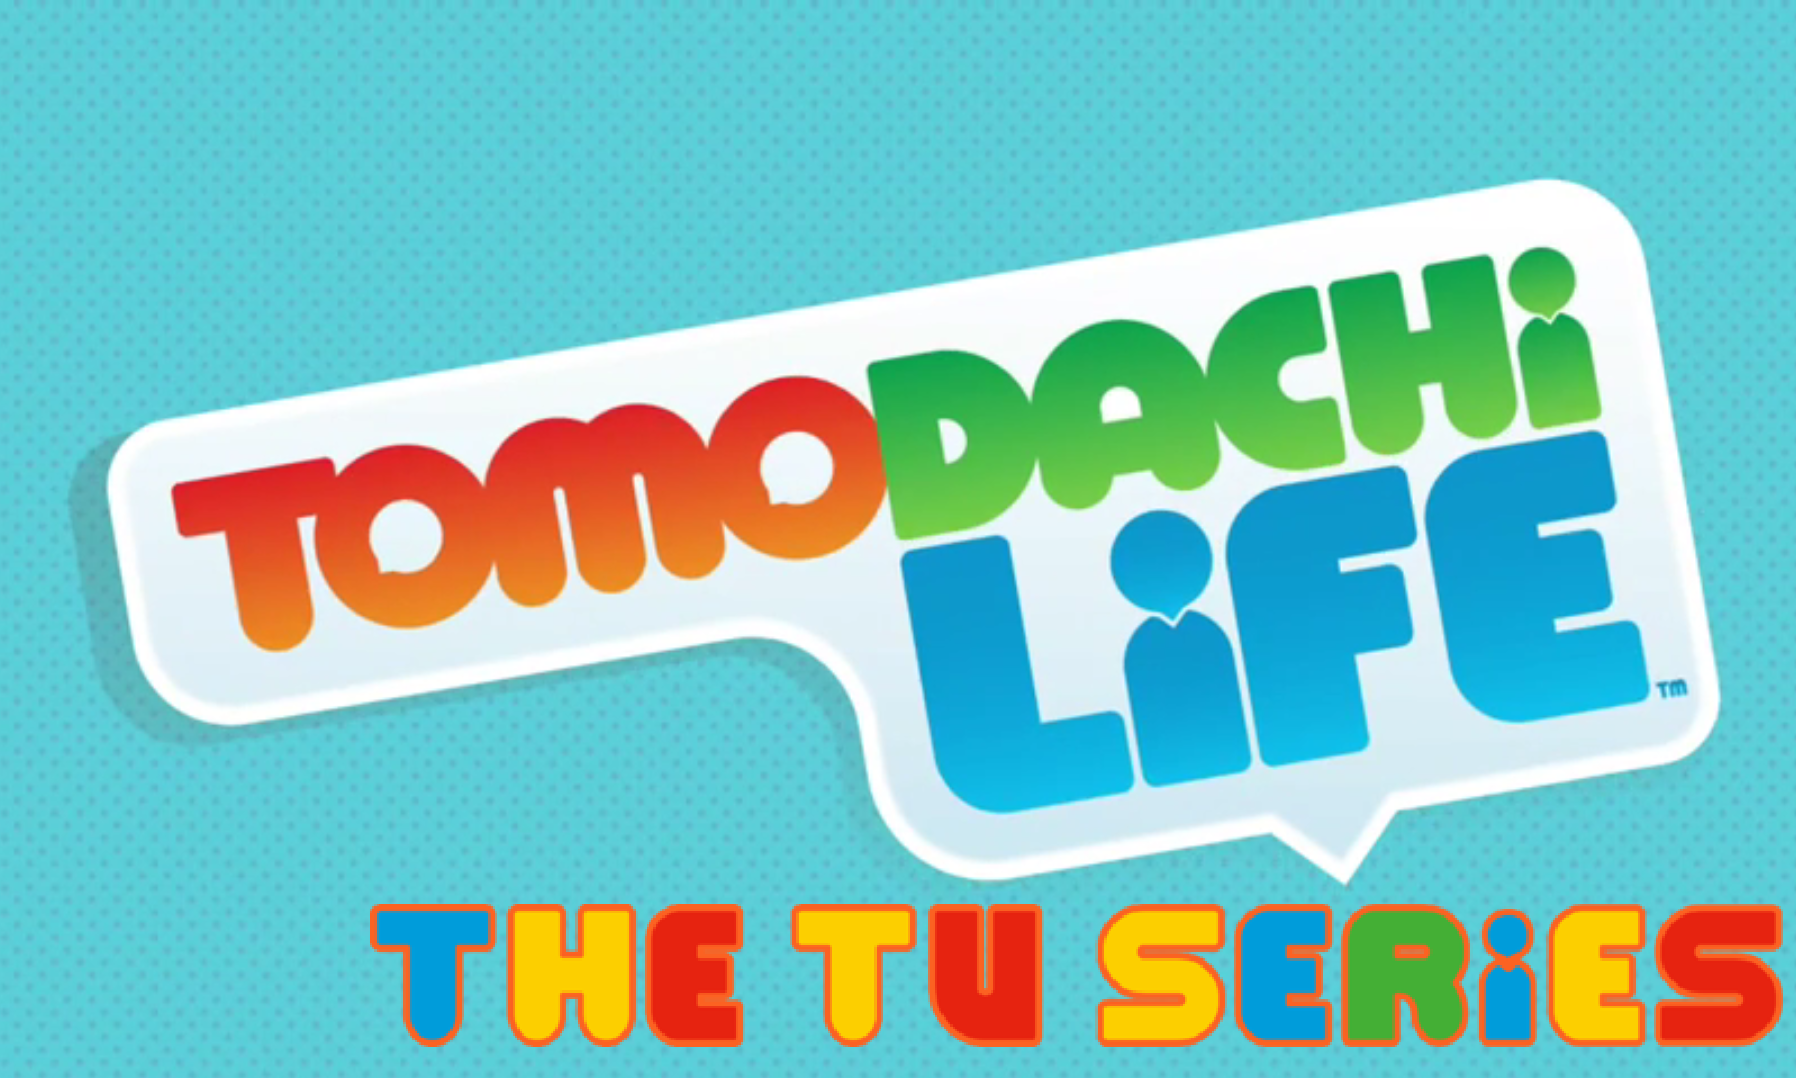 https://static.wikia.nocookie.net/tomodachi-life-the-tv-series-fanon/images/0/06/Tomodachi_Life_The_TV_Series_Logo.png/revision/latest?cb=20231101211113